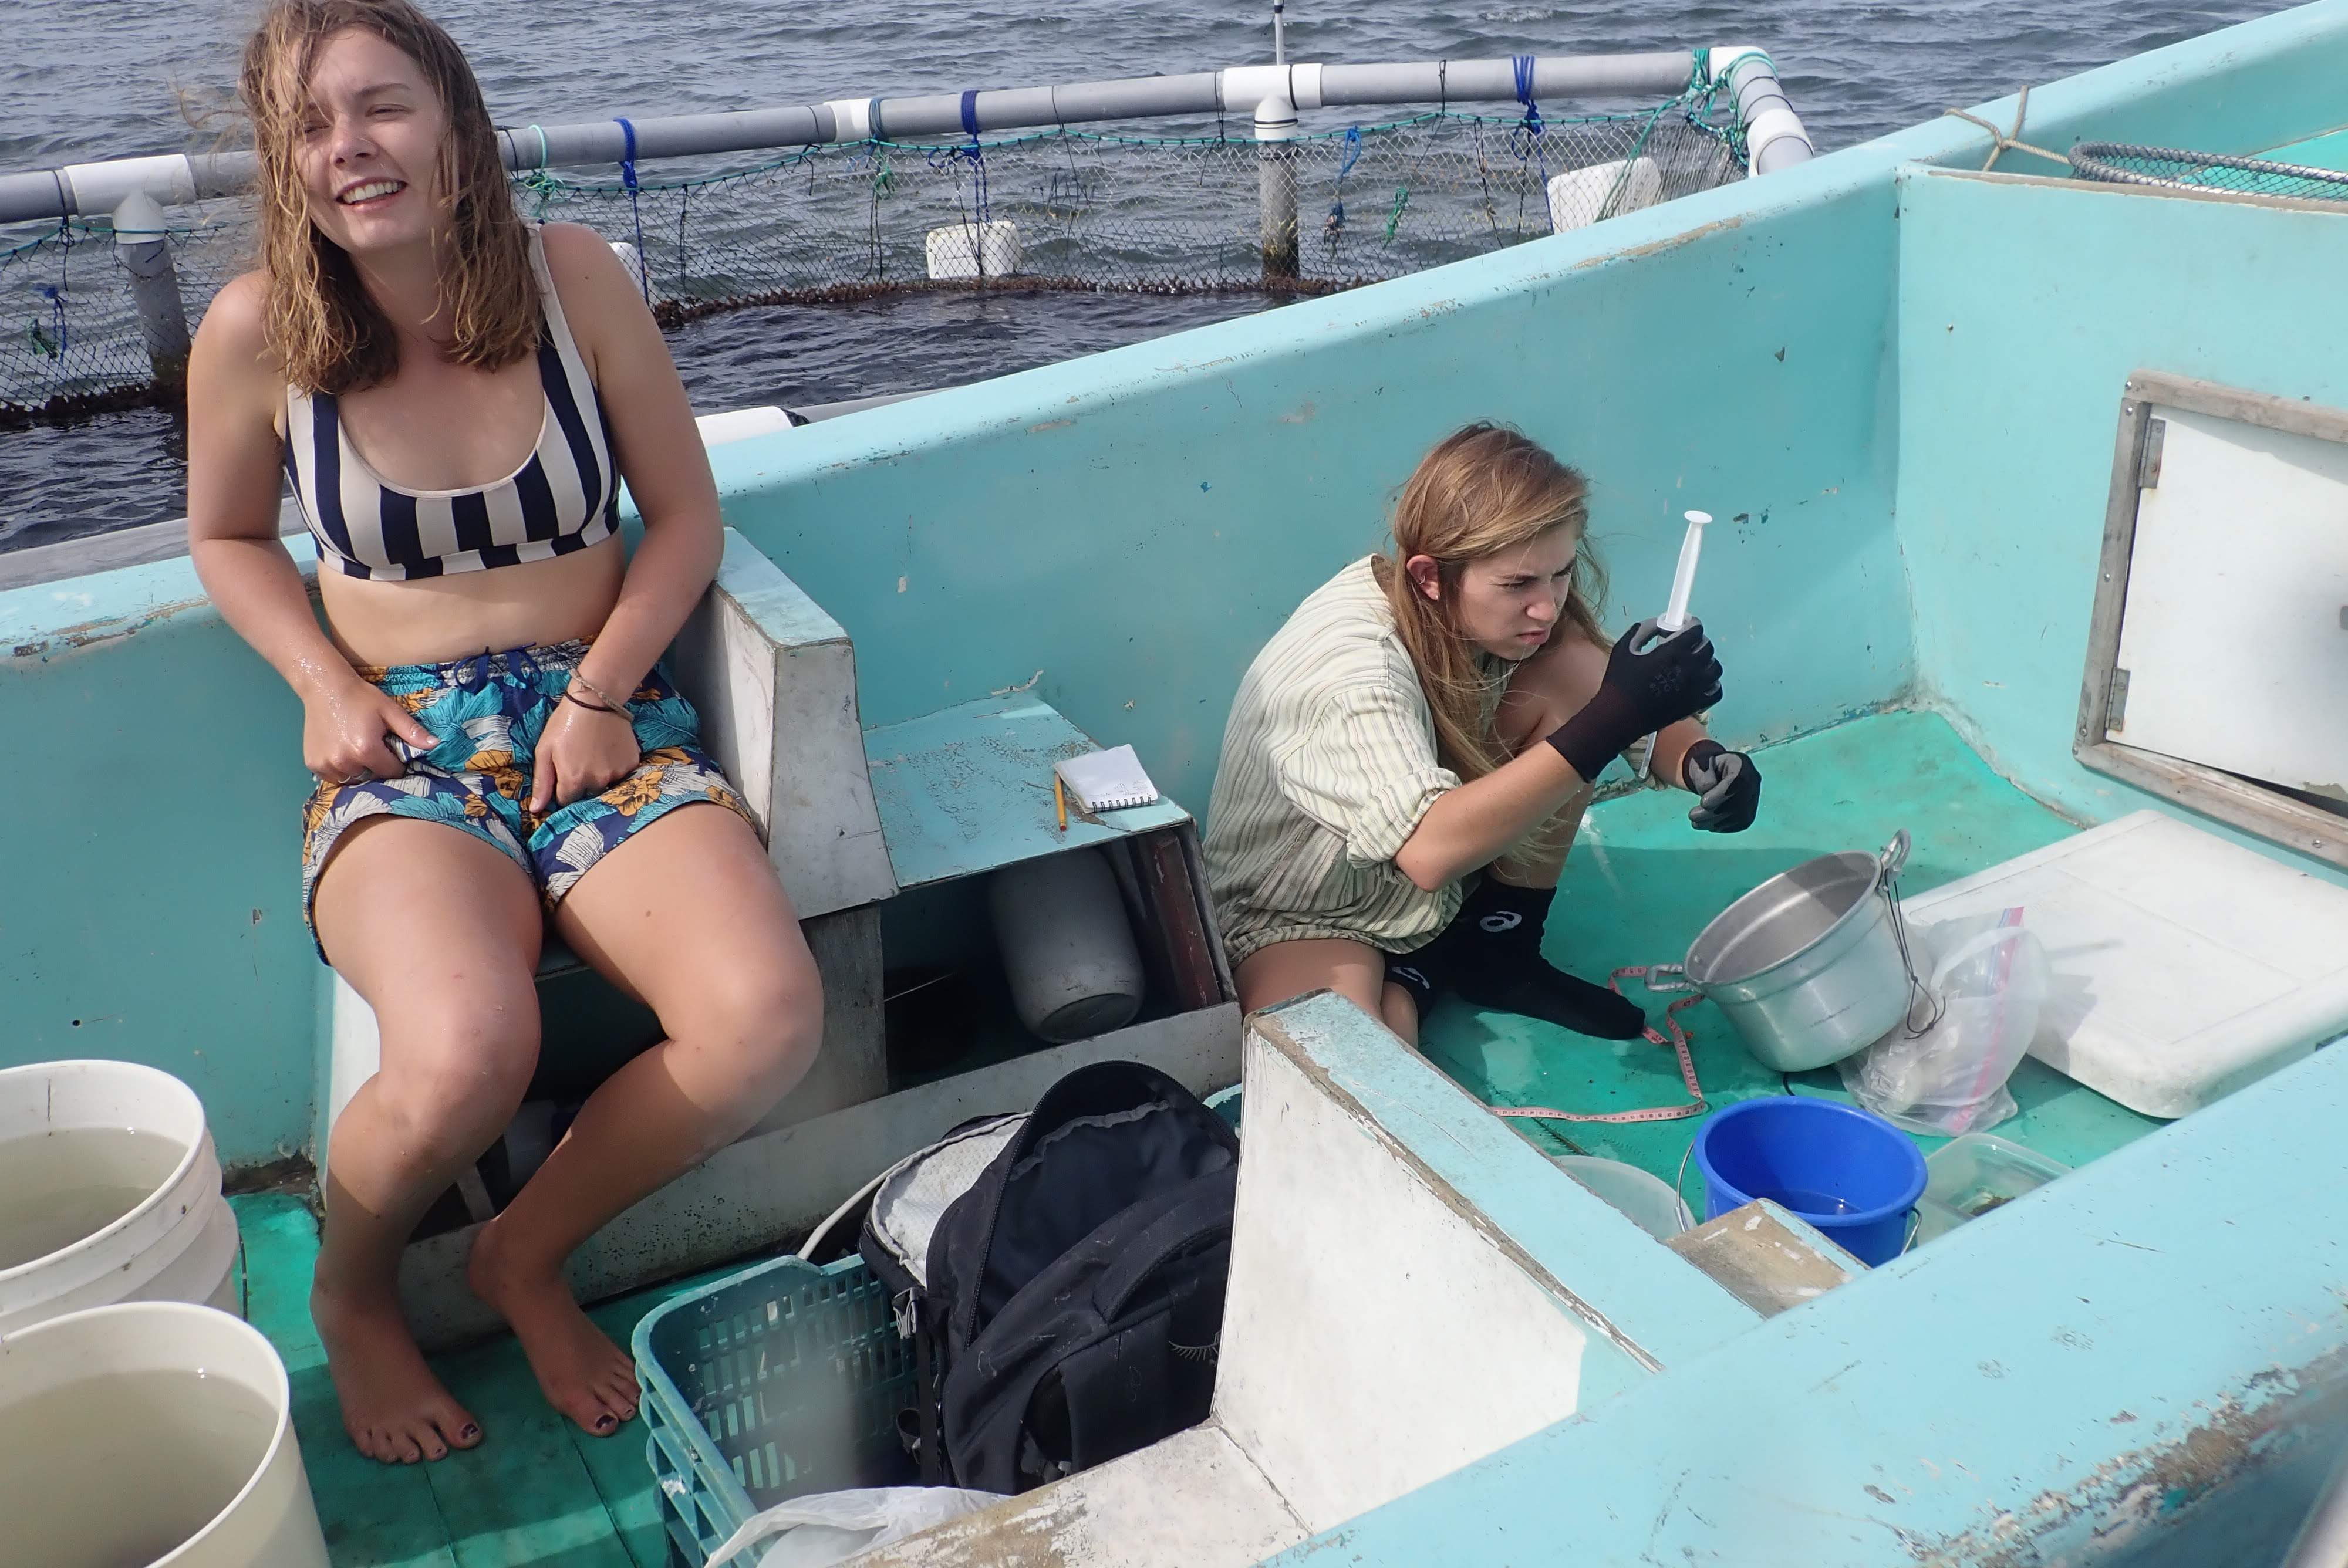 Measuring the water displacement of individual bivalves at the end of a field day with my colleague Erin, who was relaxing on the boat after a day of snorkeling and data collection for her own research.